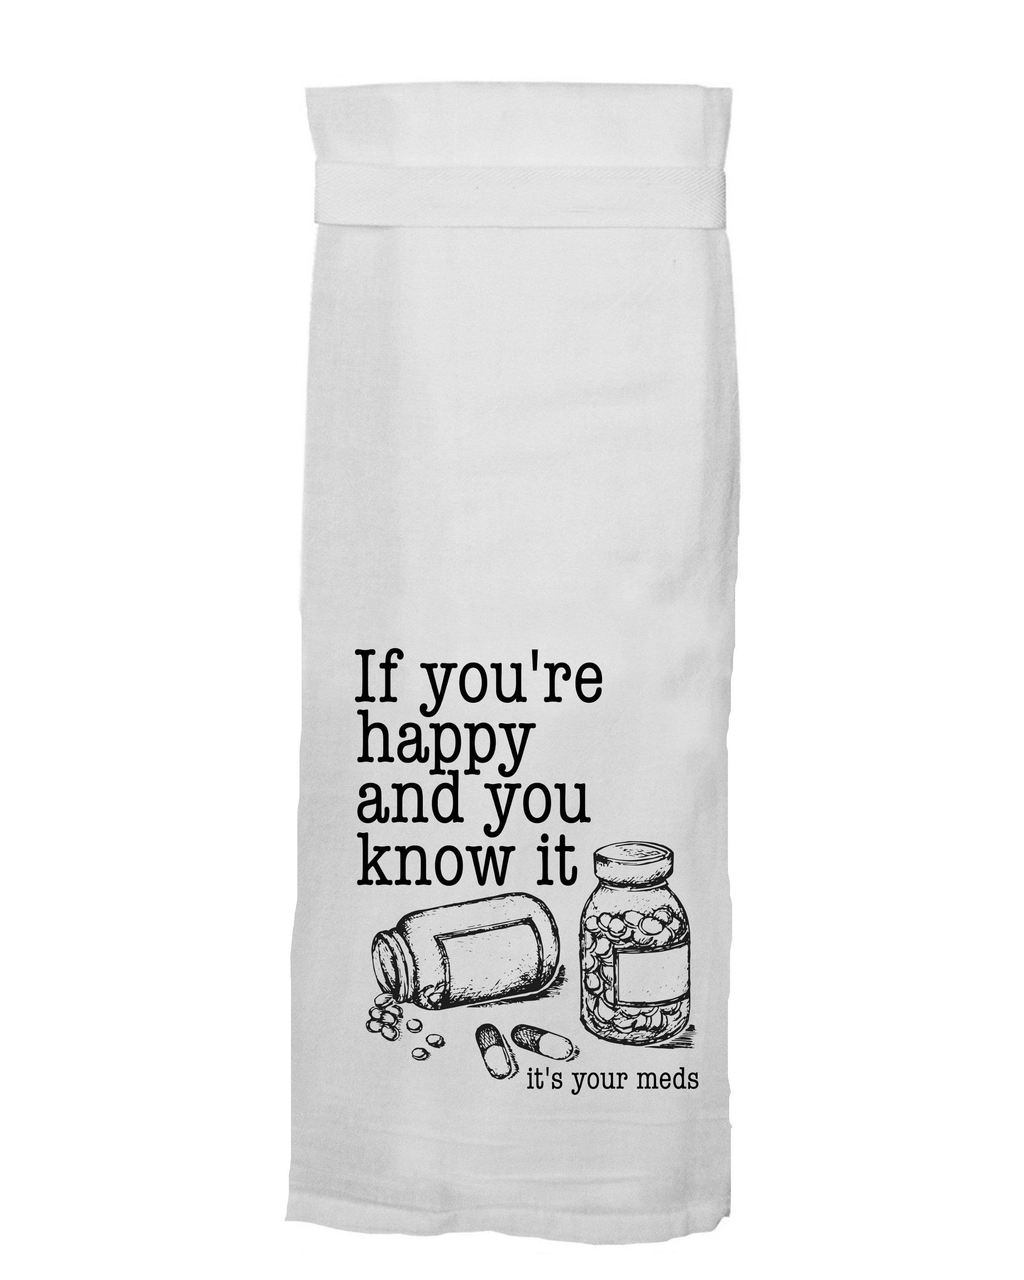 If You're Happy And You Know It, It's Your Meds Tea Towel